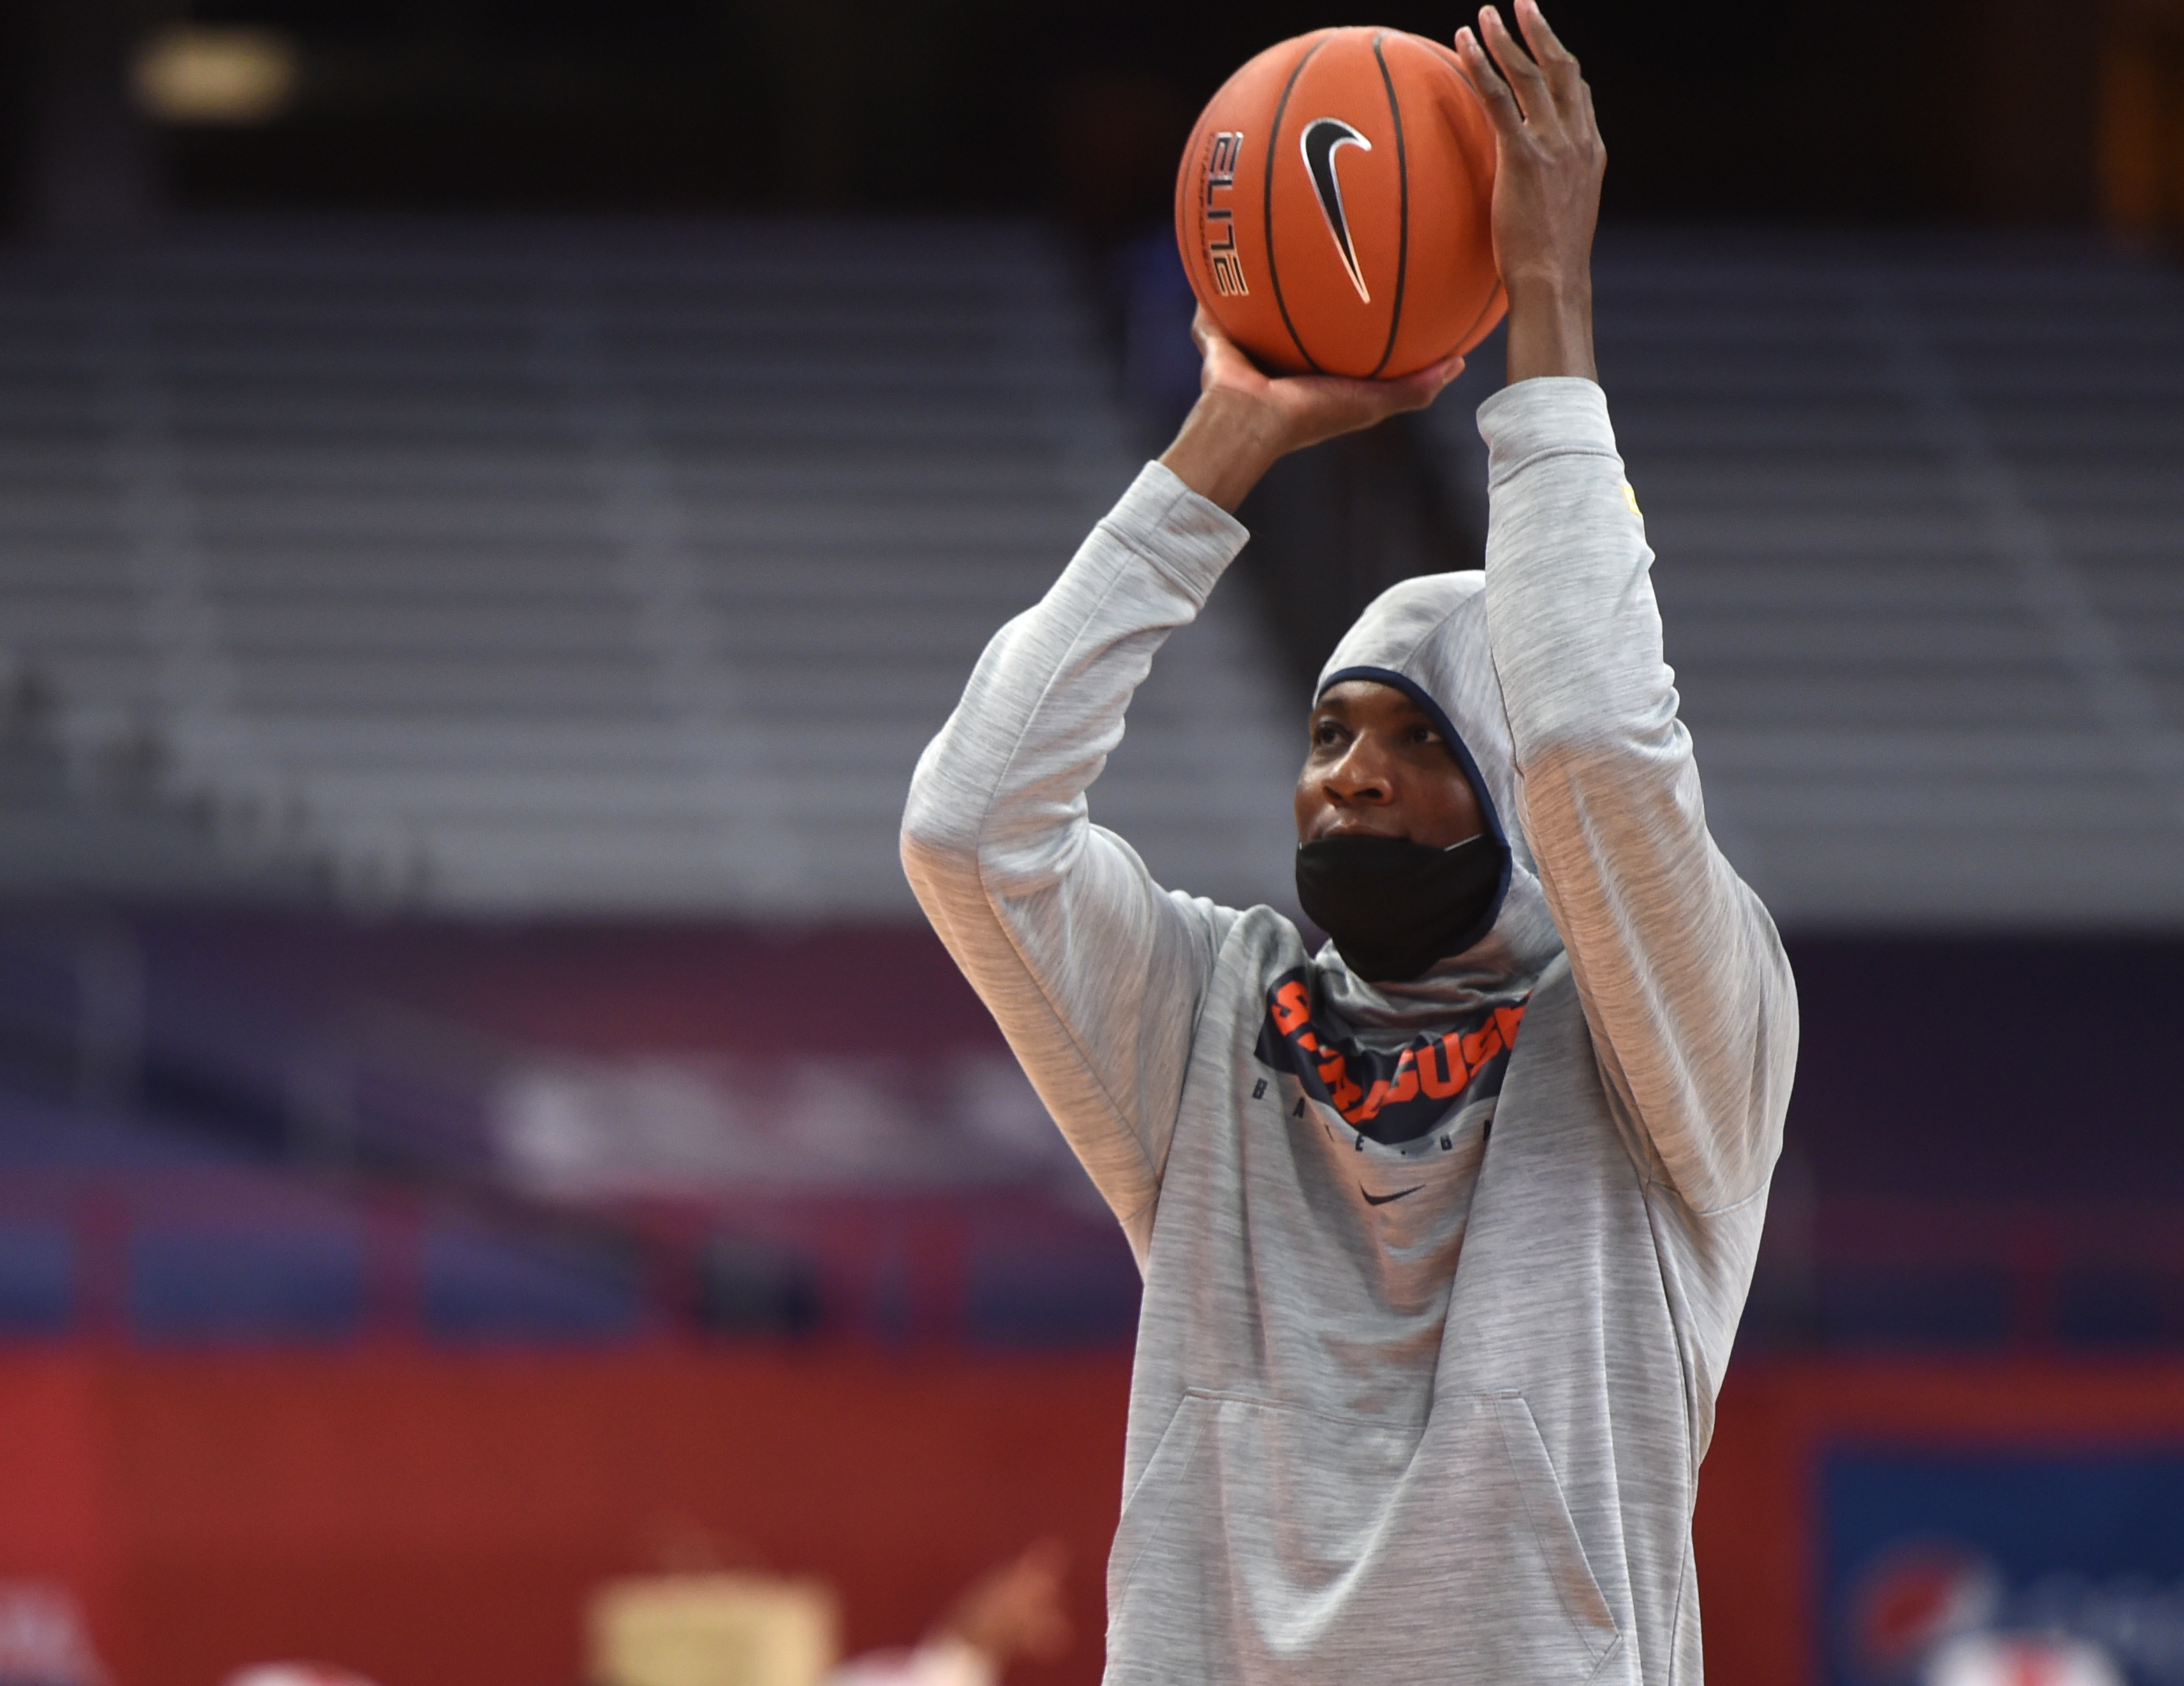 Axe: Former Syracuse star Oshae Brissett finds new NBA home with